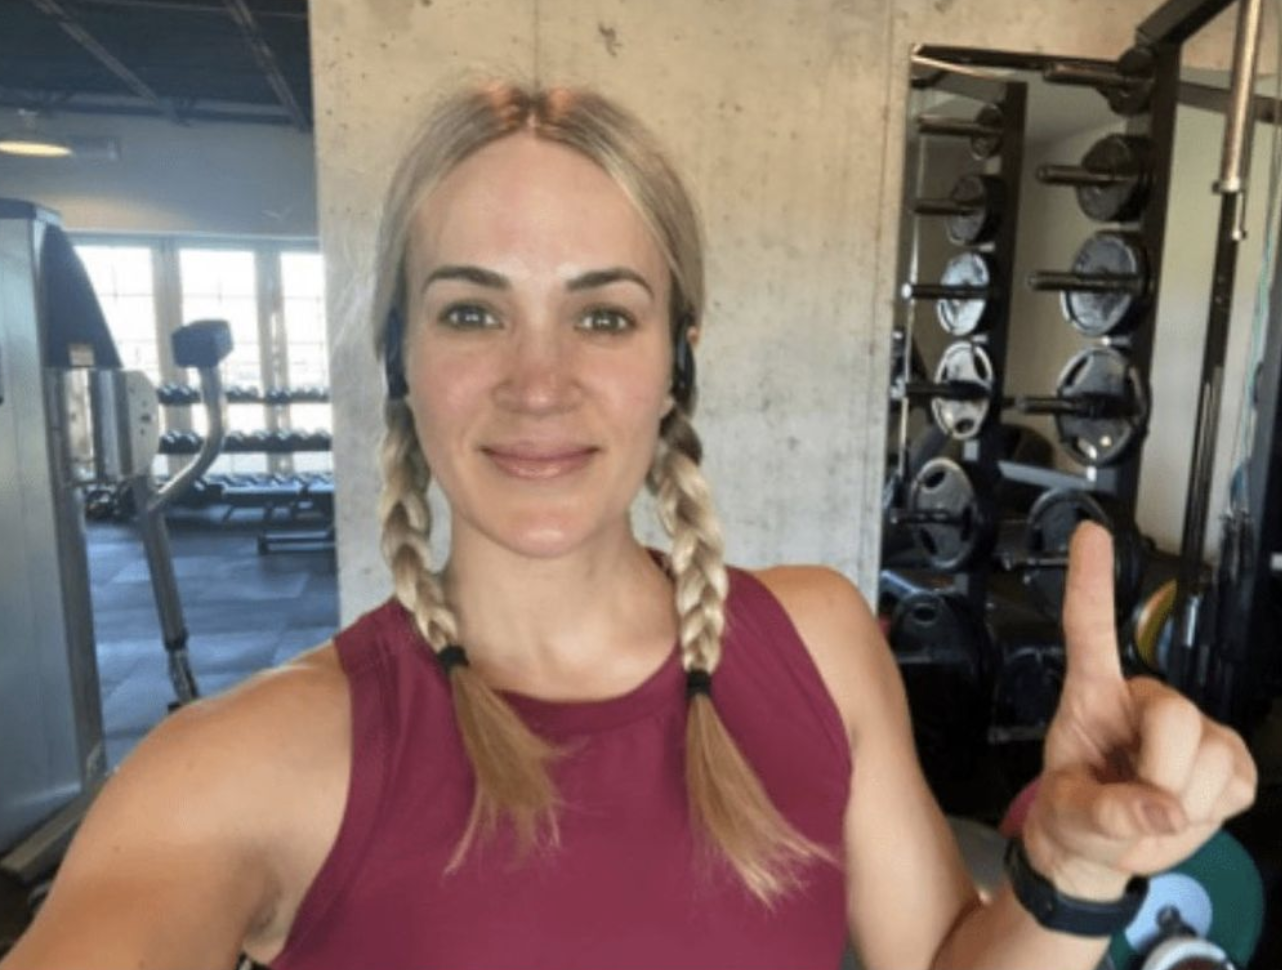 Carrie Underwood Just Launched a Fitness App